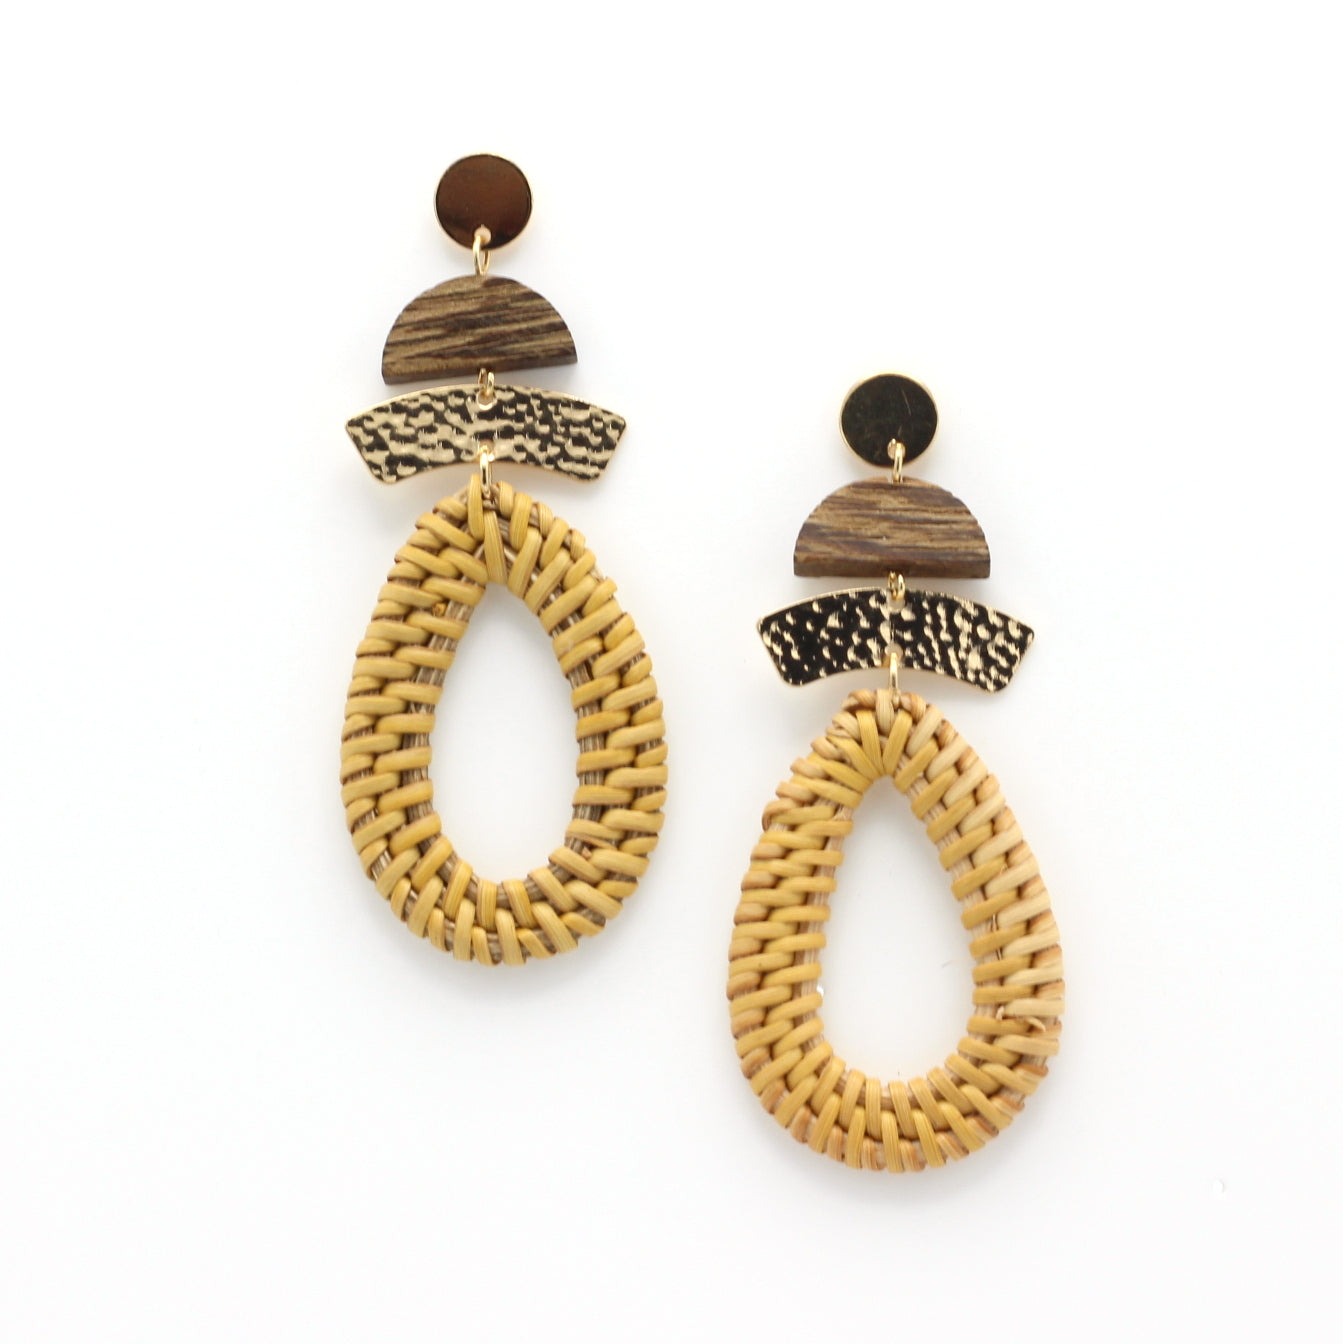 Earrings Handmade Statement Brushed Gold Wood and Rattan - Hashtag Bamboo